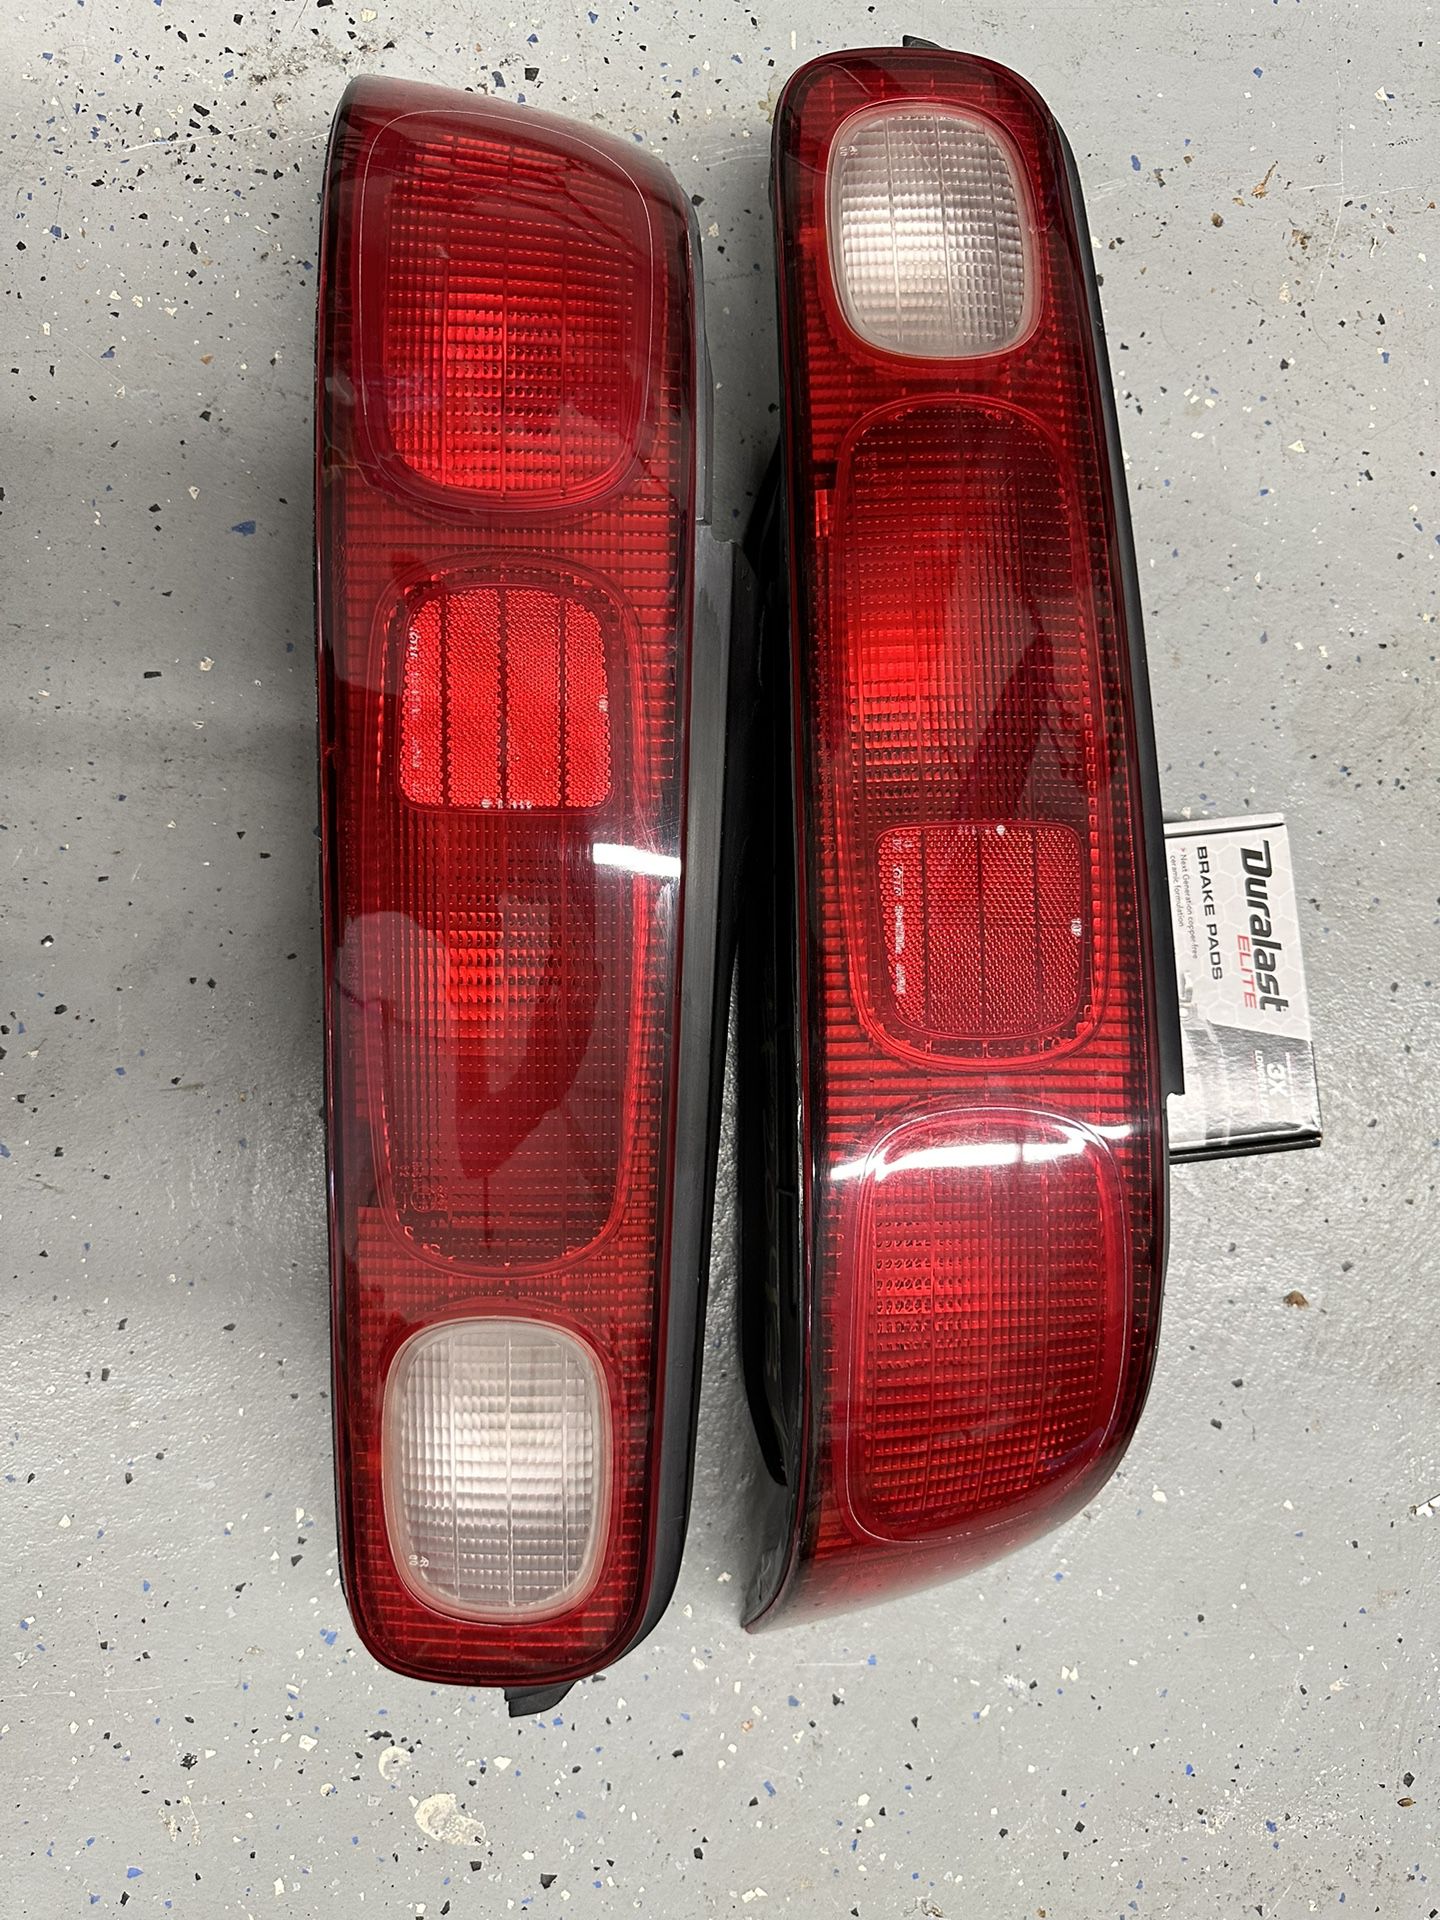 ACURA INTEGRA 98-01 ALL RED TAILLIGHTS 